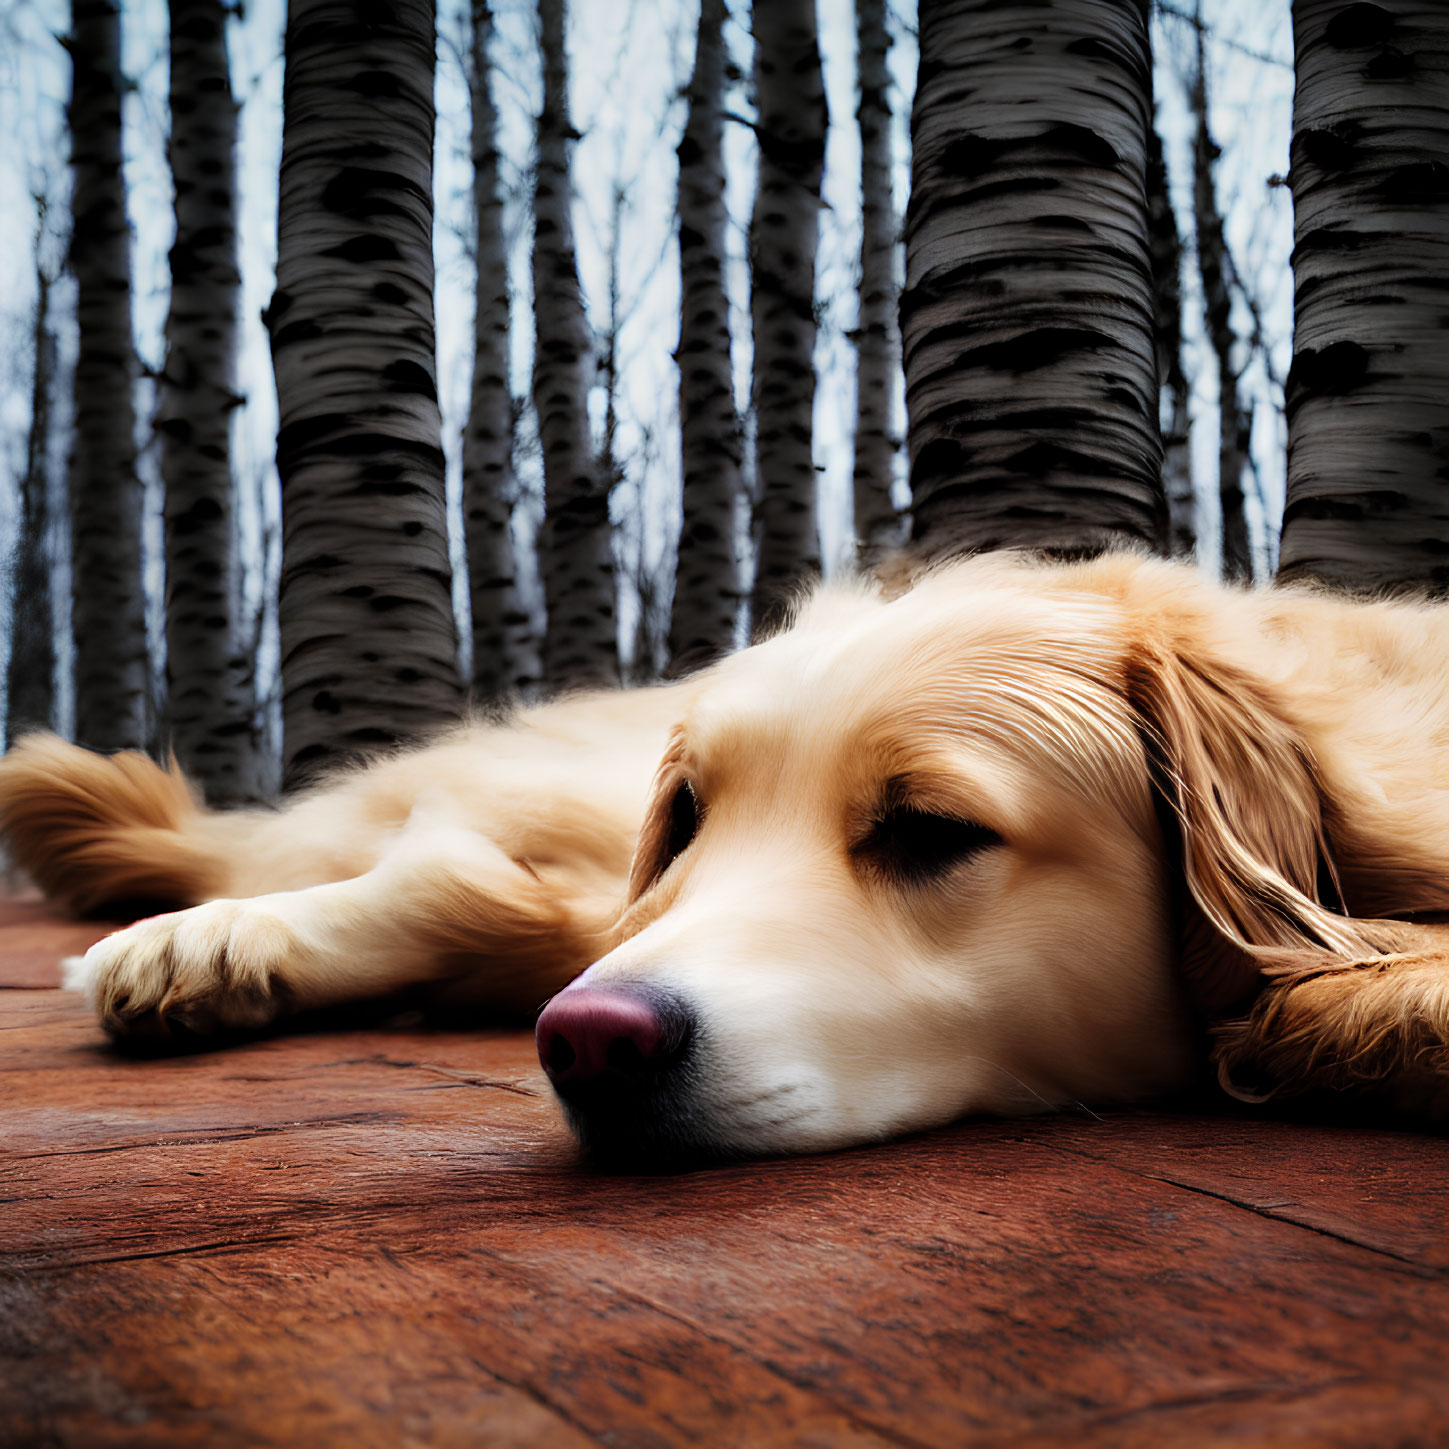 Golden Retriever Resting on Wooden Deck with Birch Trees and Blue Sky